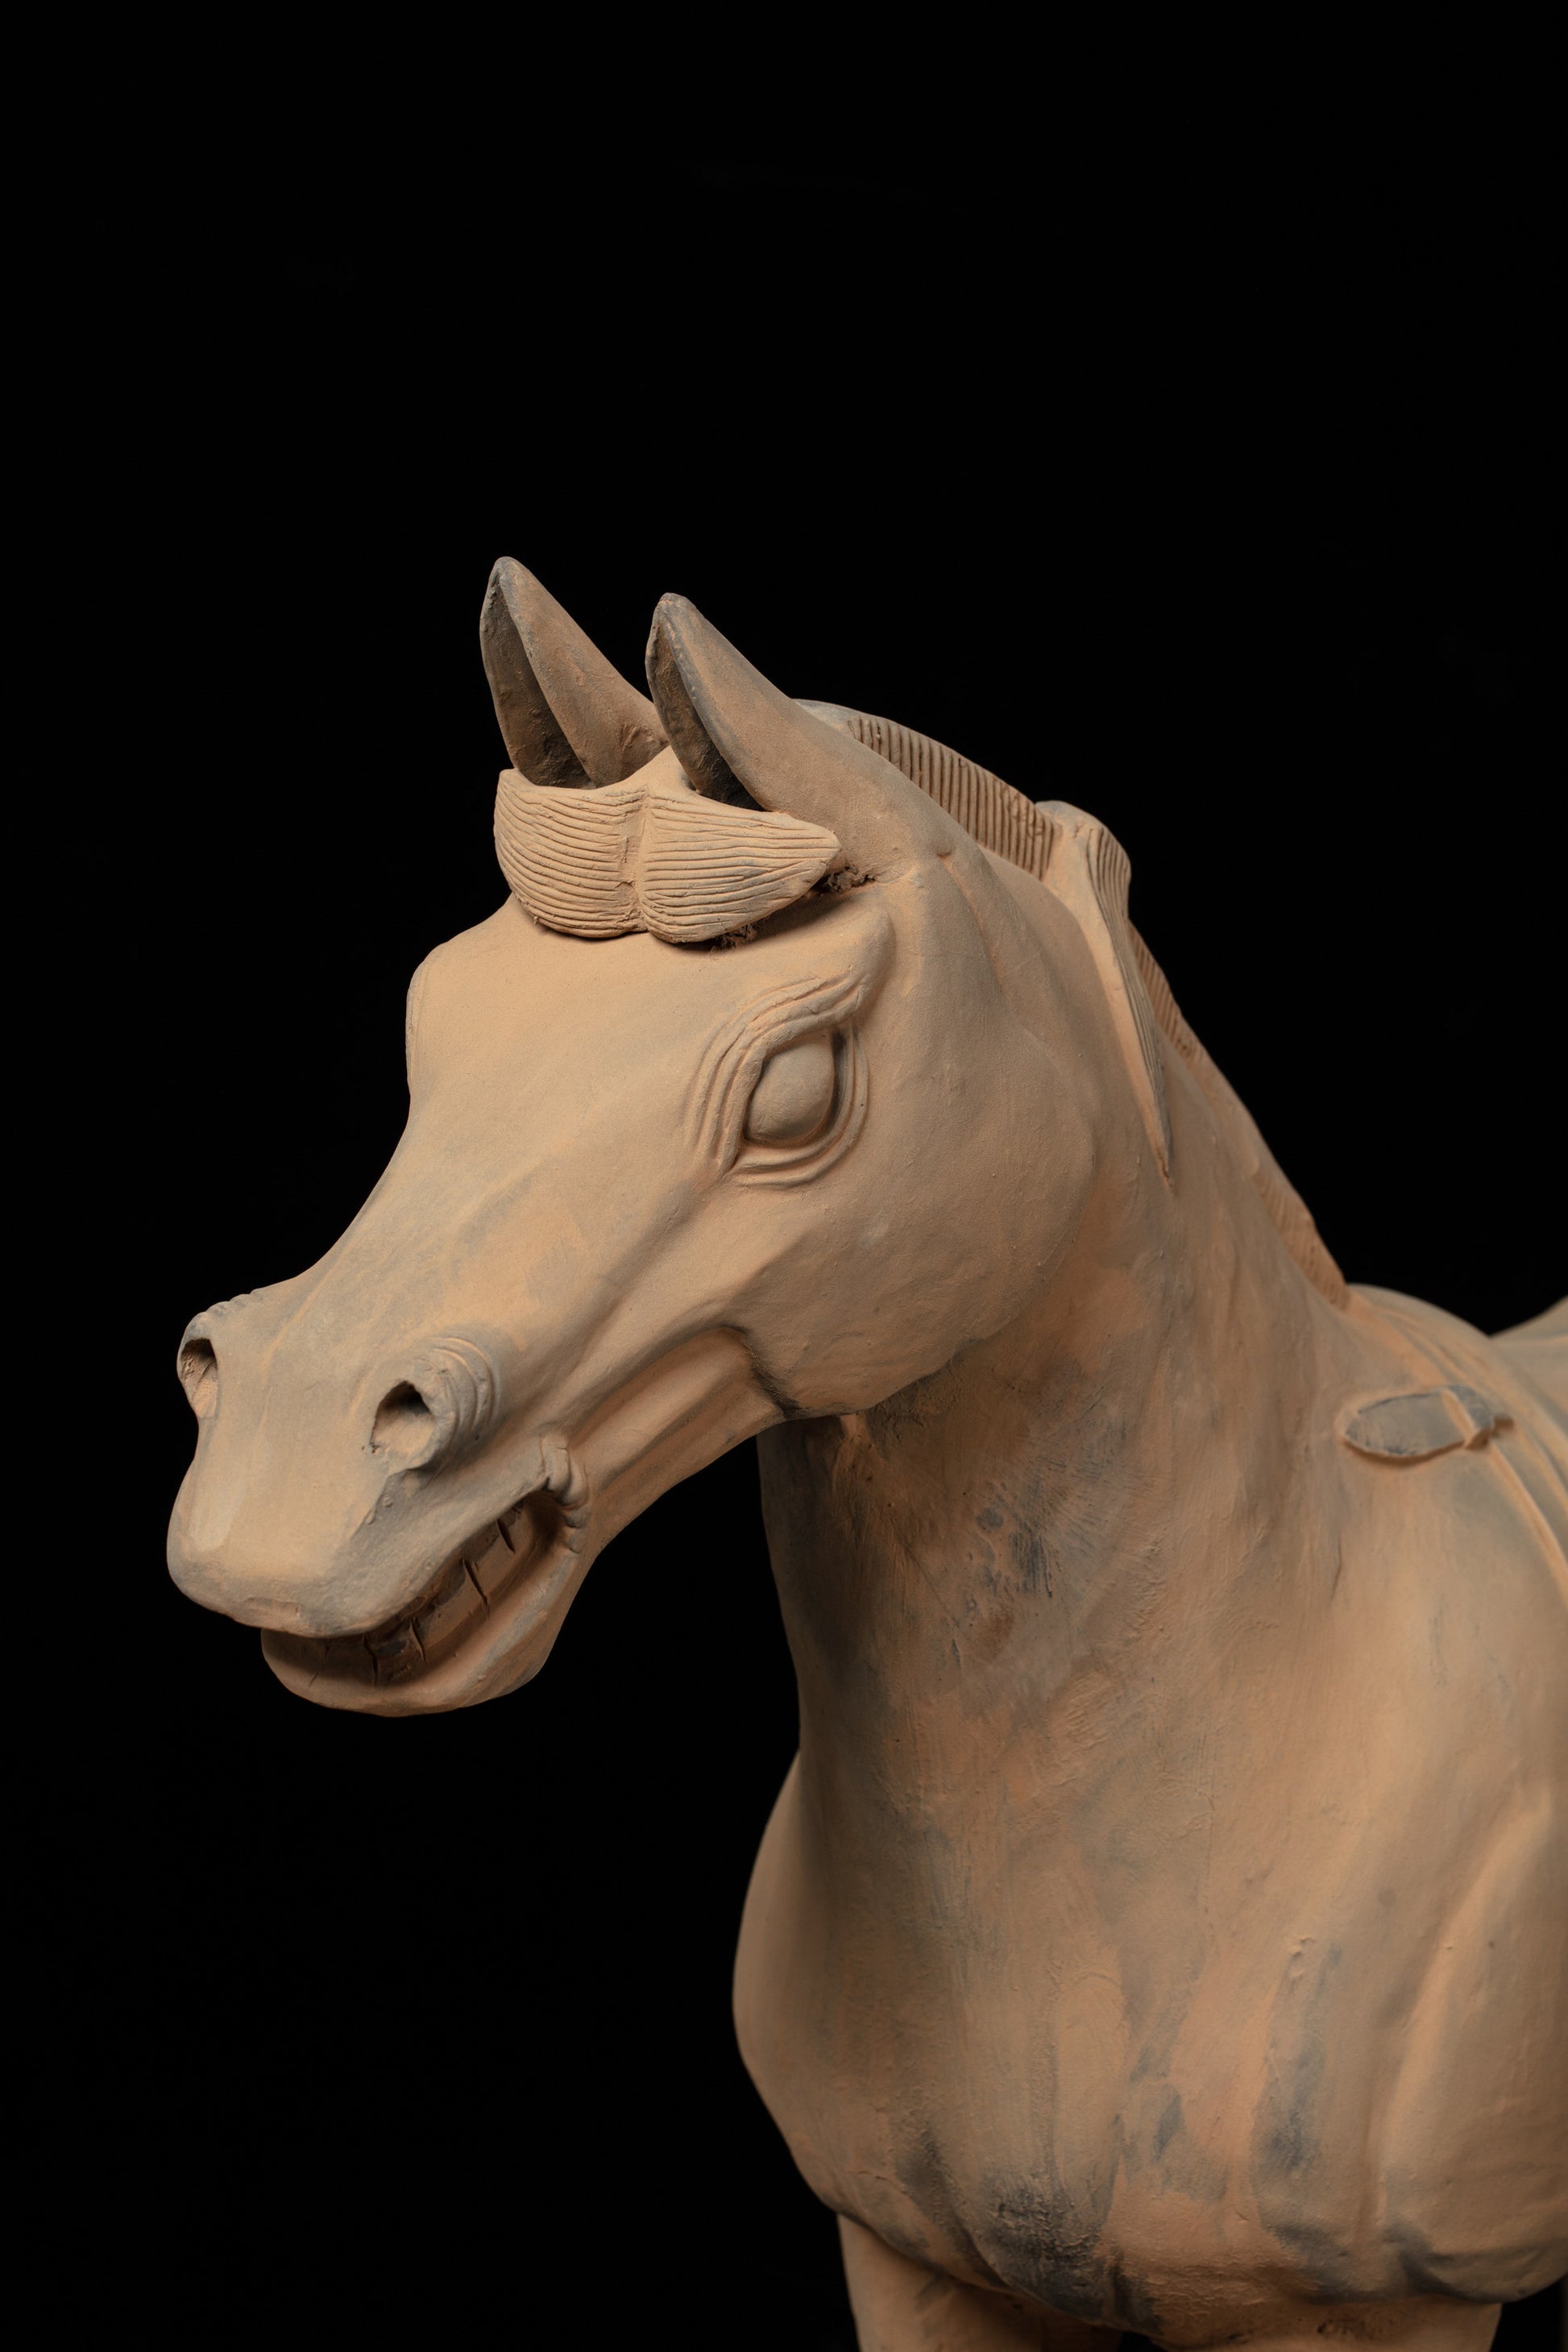 70CM Horse - CLAYARMY -Close-up detail of Clayarmy's 70CM Terracotta Horse – Exquisite craftsmanship in rich yellow-brown clay.